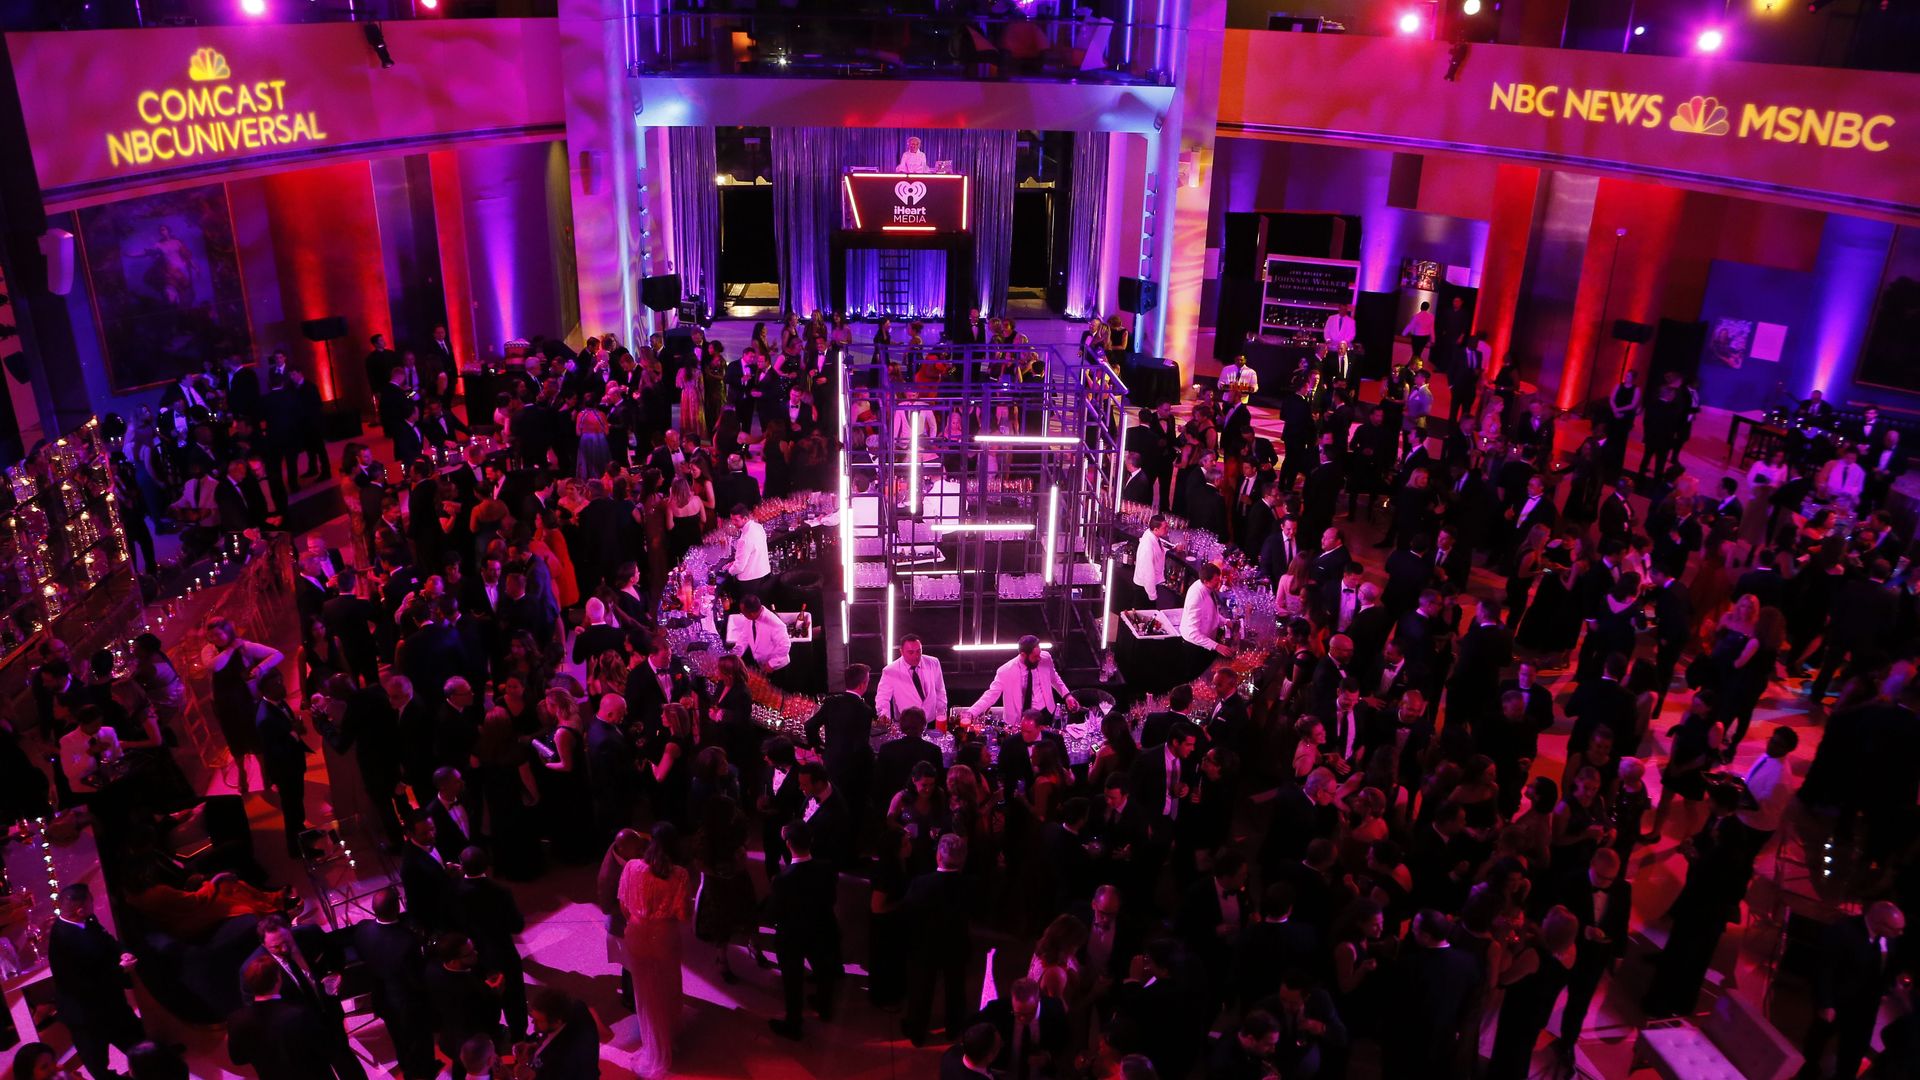 "The After Party," by NBC News, MSNBC and Comcast NBCUniversal, at the Italian Embassy (Photo: NBC News)